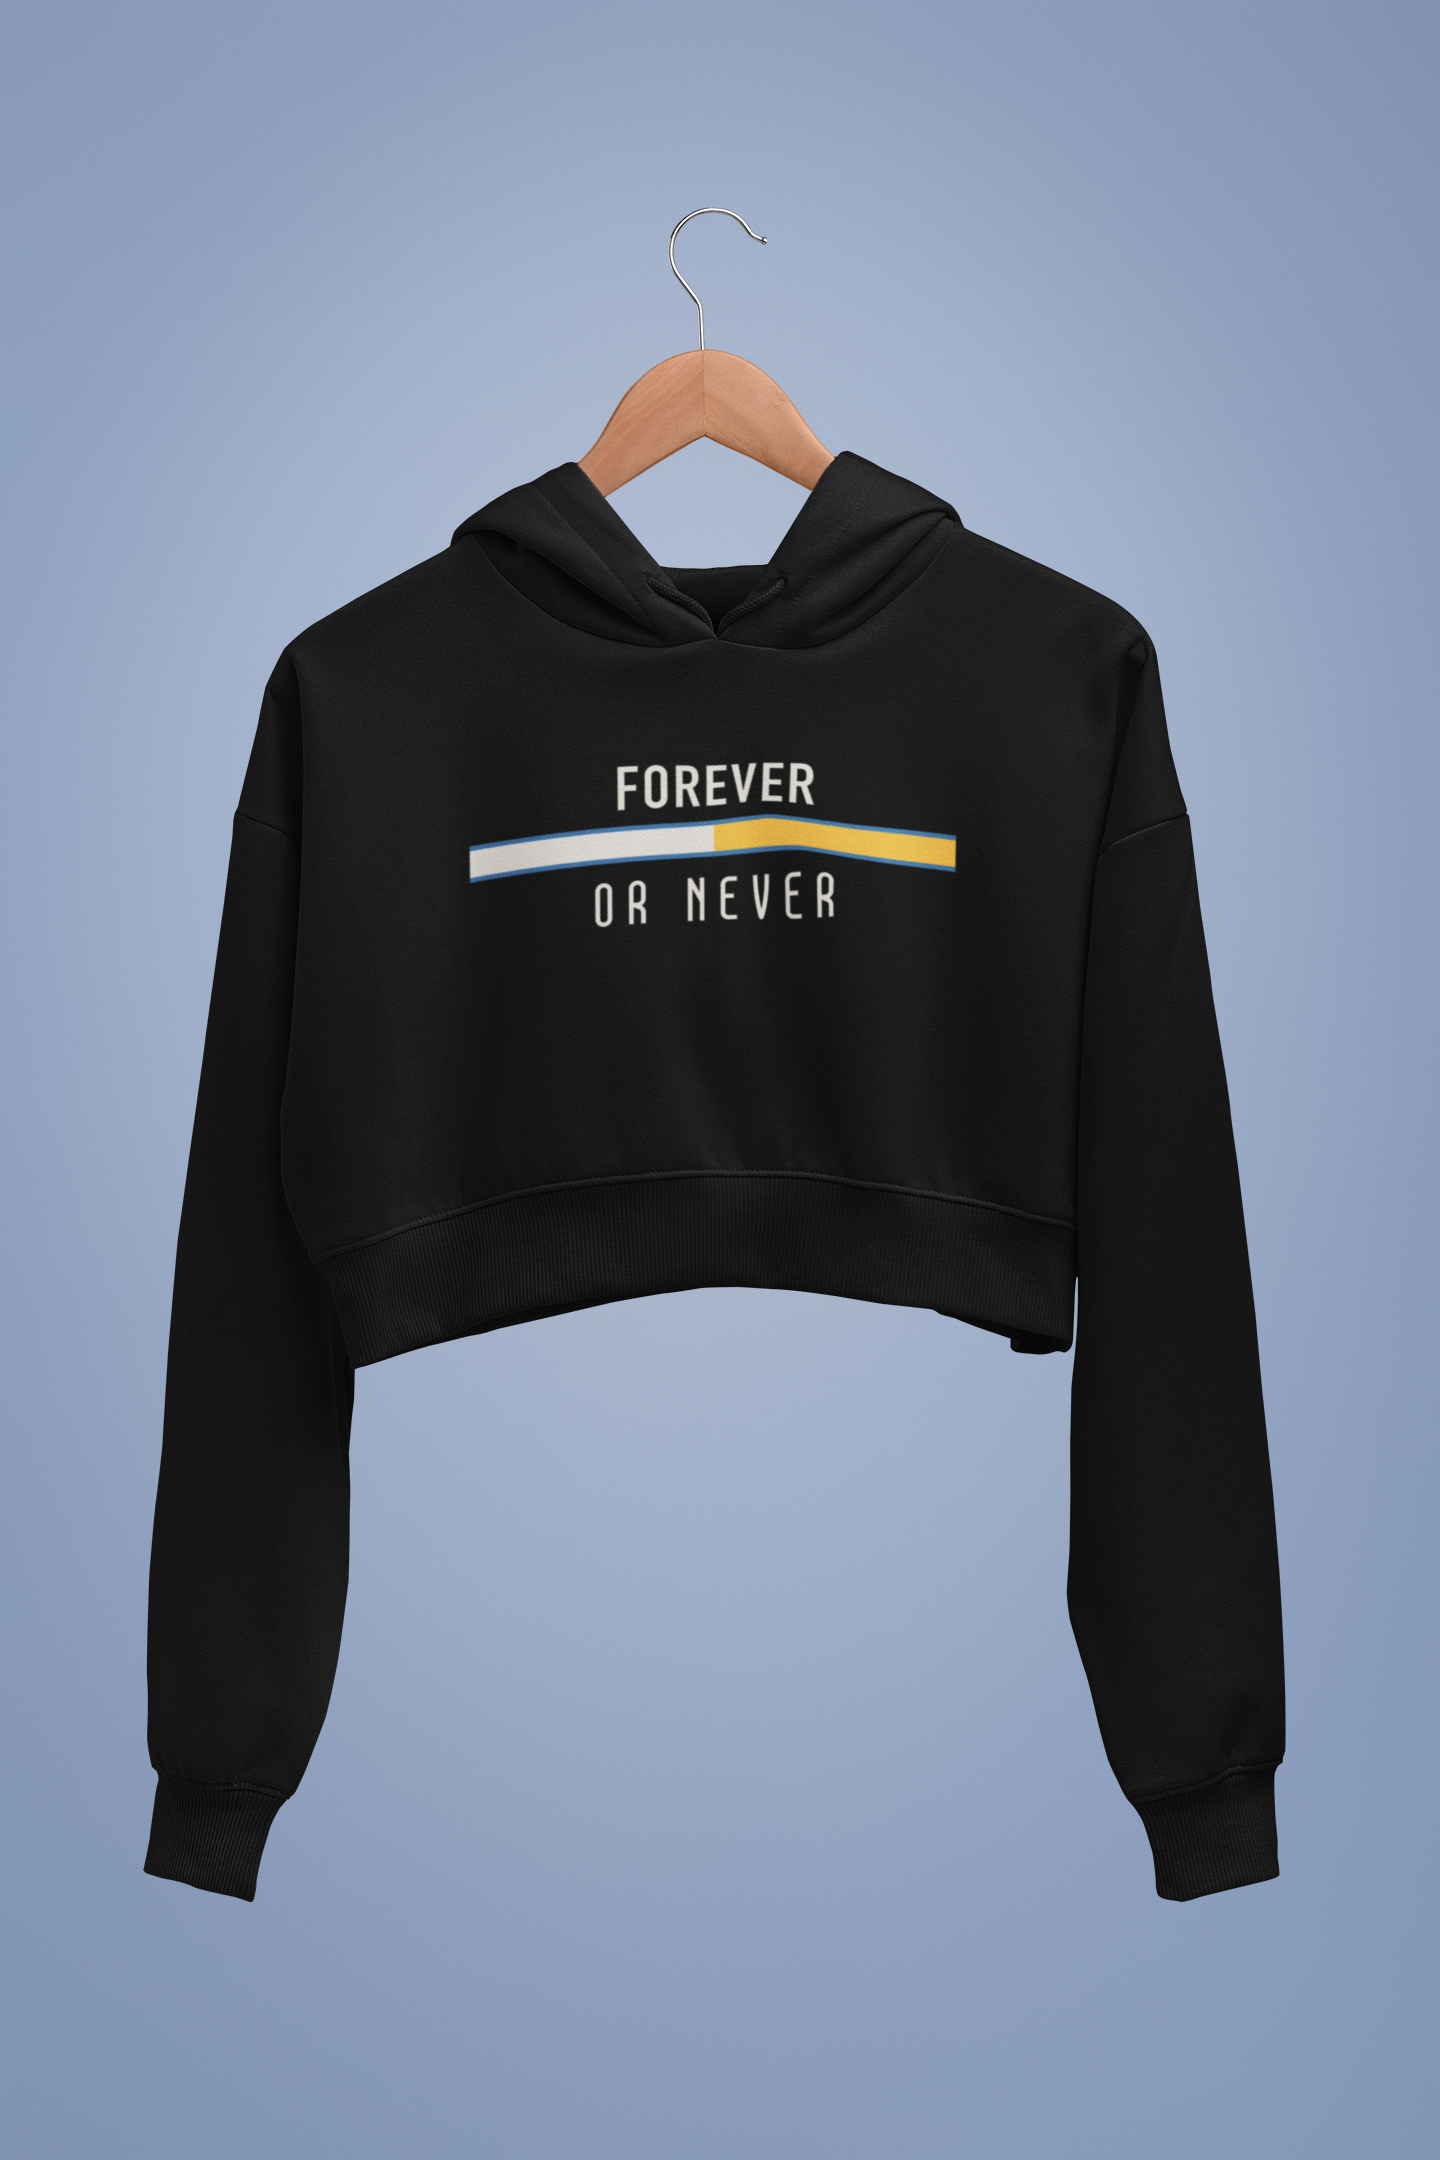 Forever Or Never - Winter Crop Hoodies